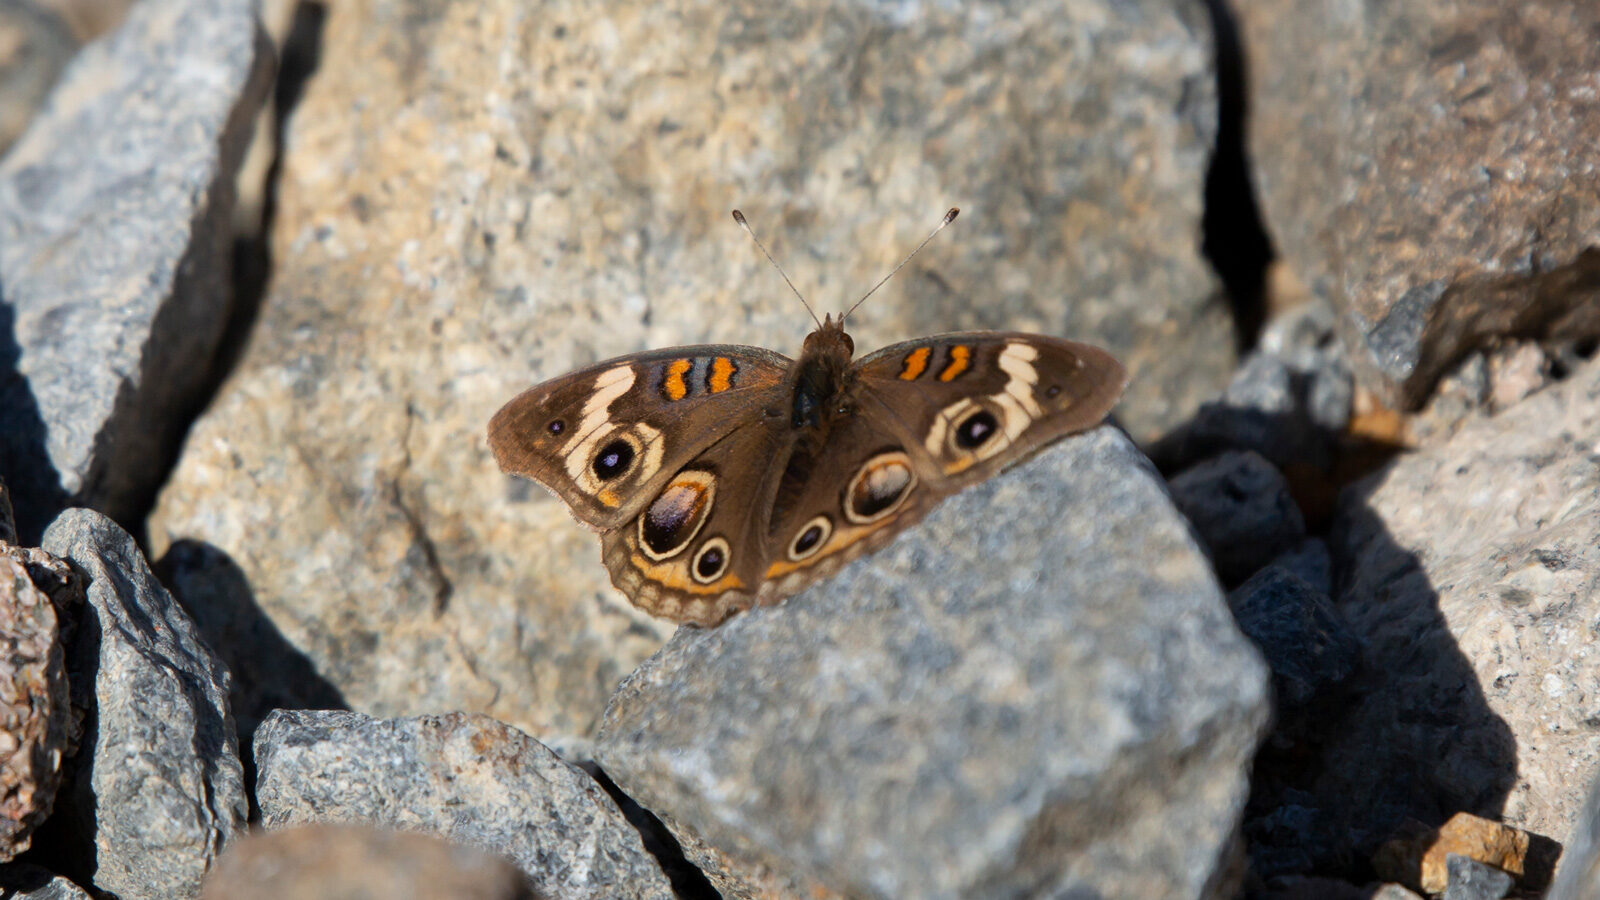 Common buckeye butterfly standing on a stone